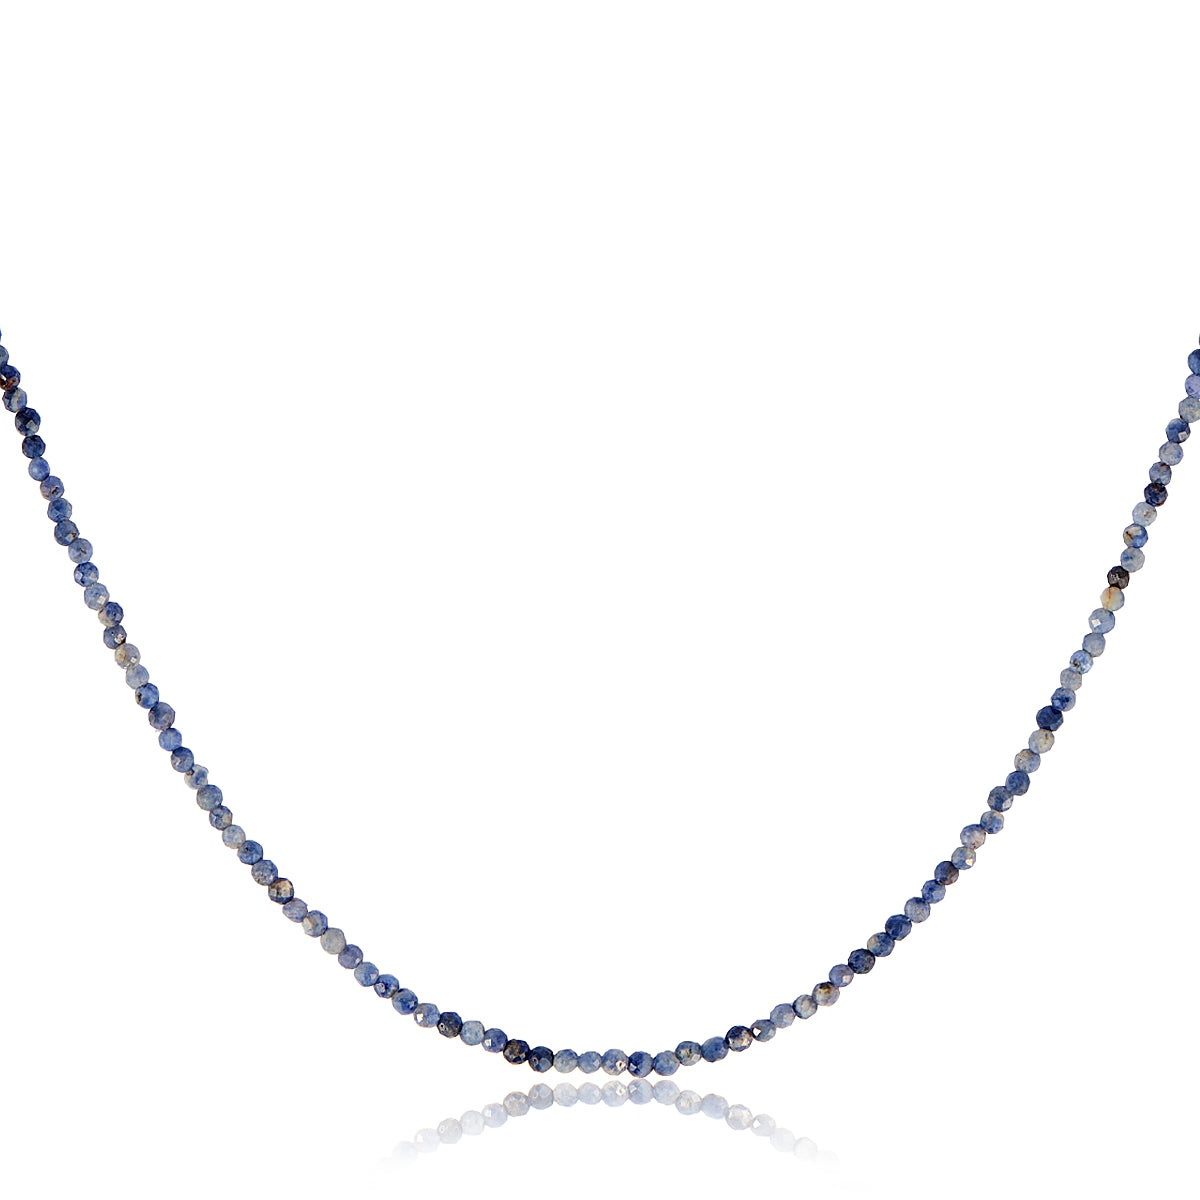 BLUE SAPPHIRE NECKLACE WITH SILVER CLASP